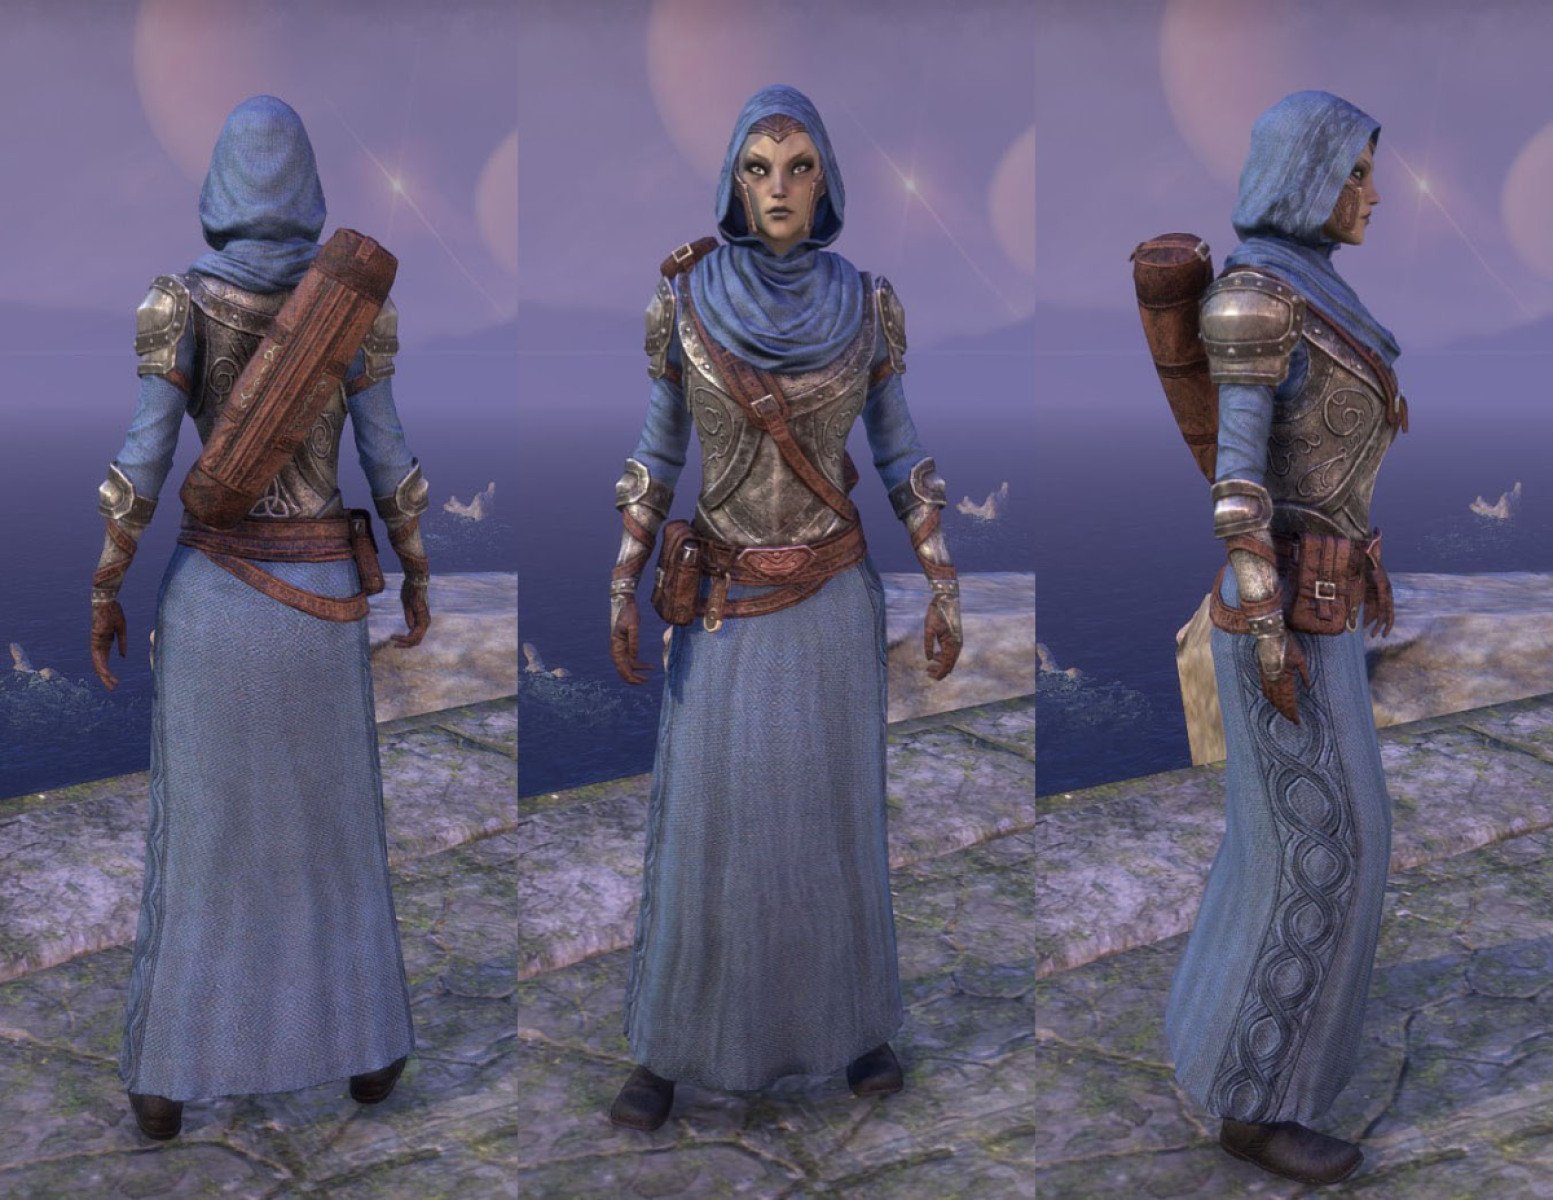 The ESO High Rock Spellsword Outfit Style hides your weapon when you unseathe it.